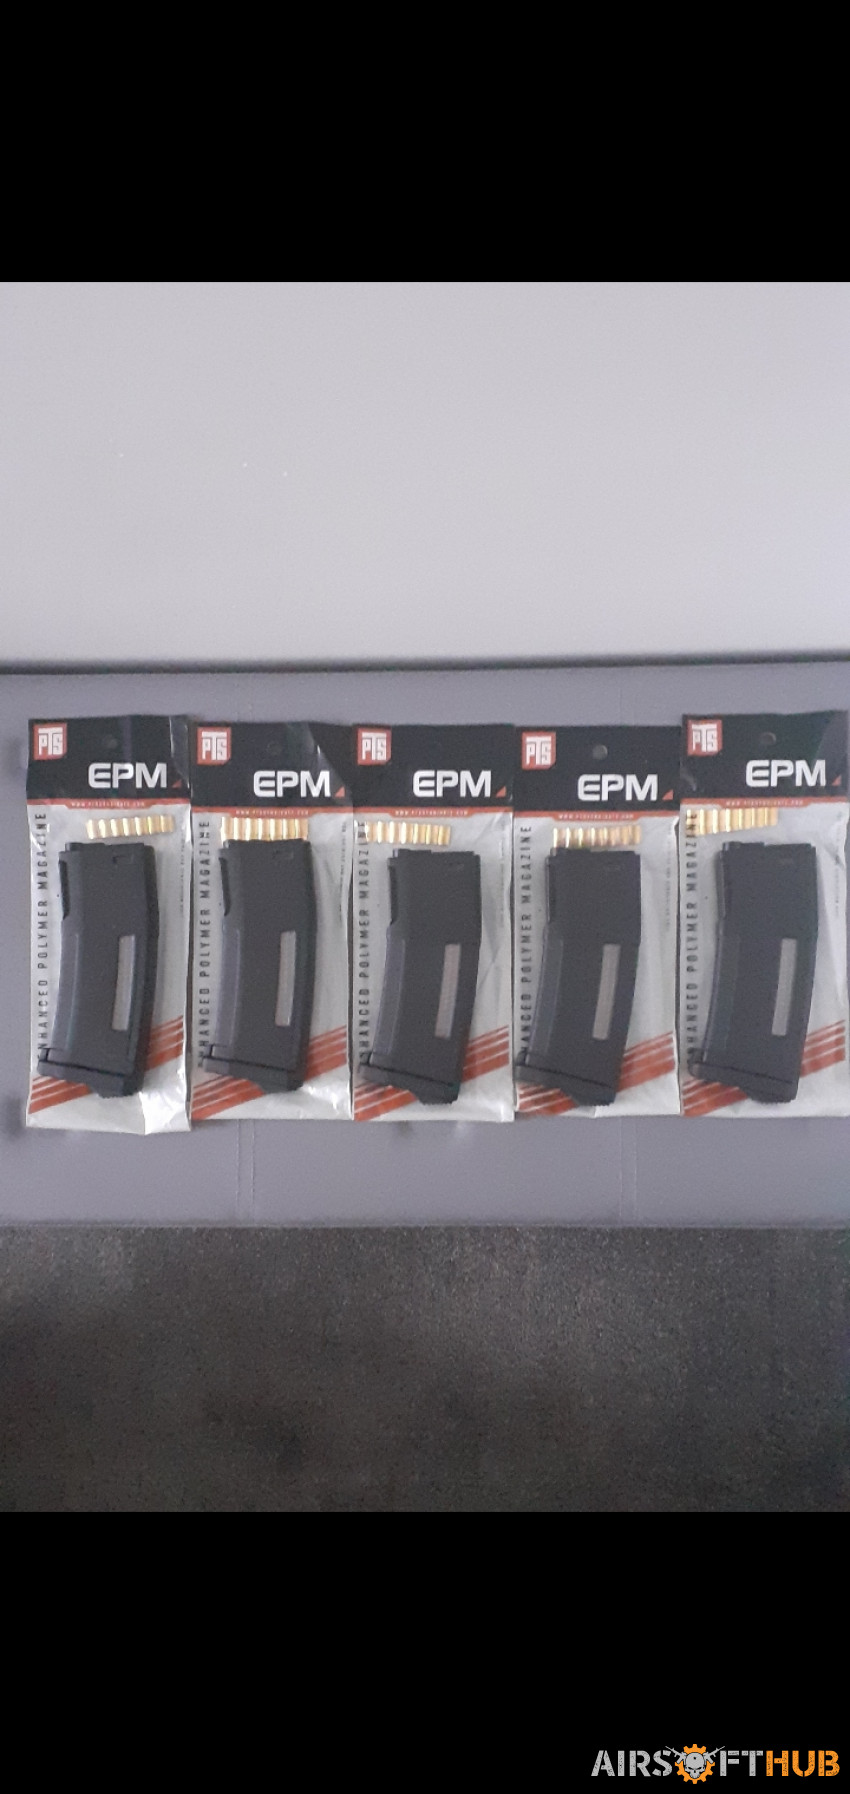 PTS EPM 150 Round Mid Cap Mags - Used airsoft equipment